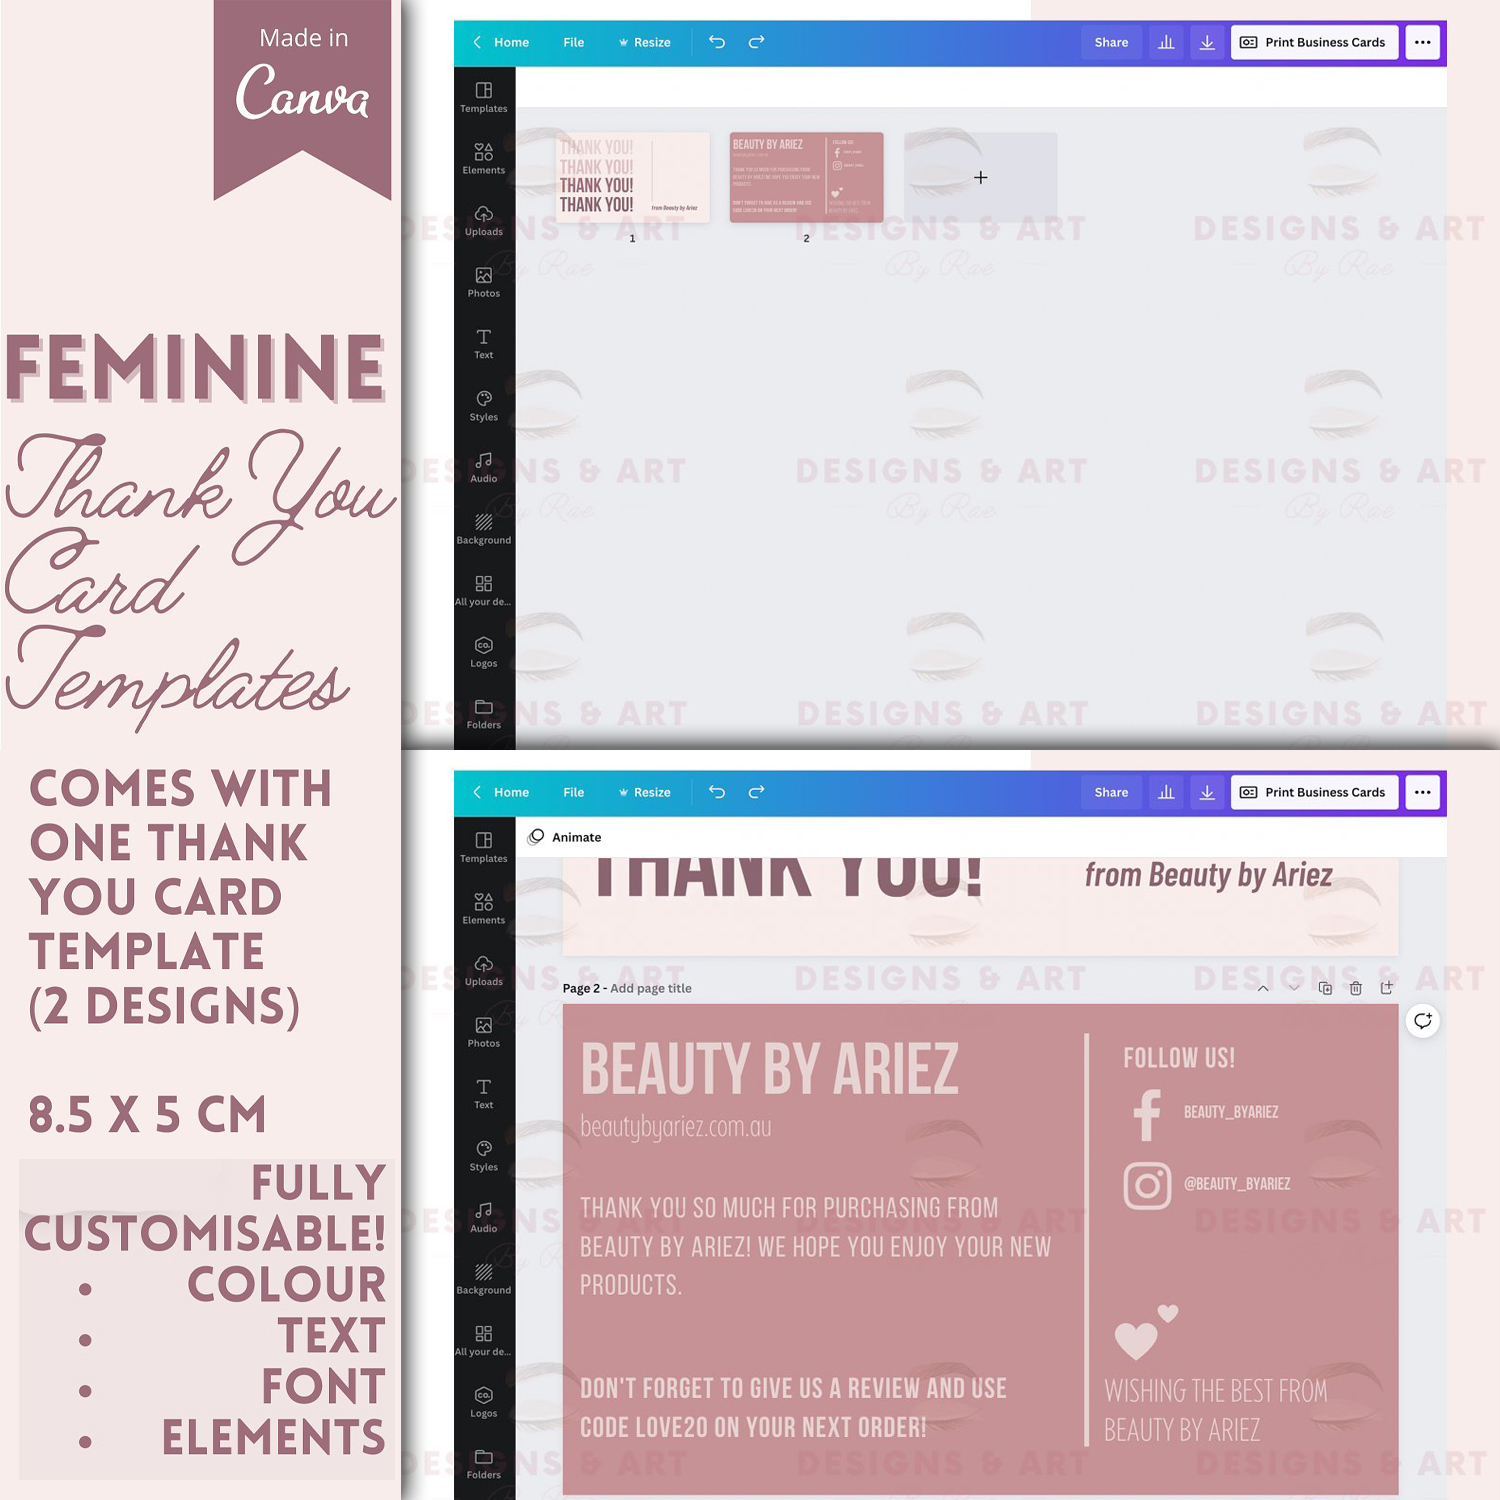 Preview feminine thank you card template.